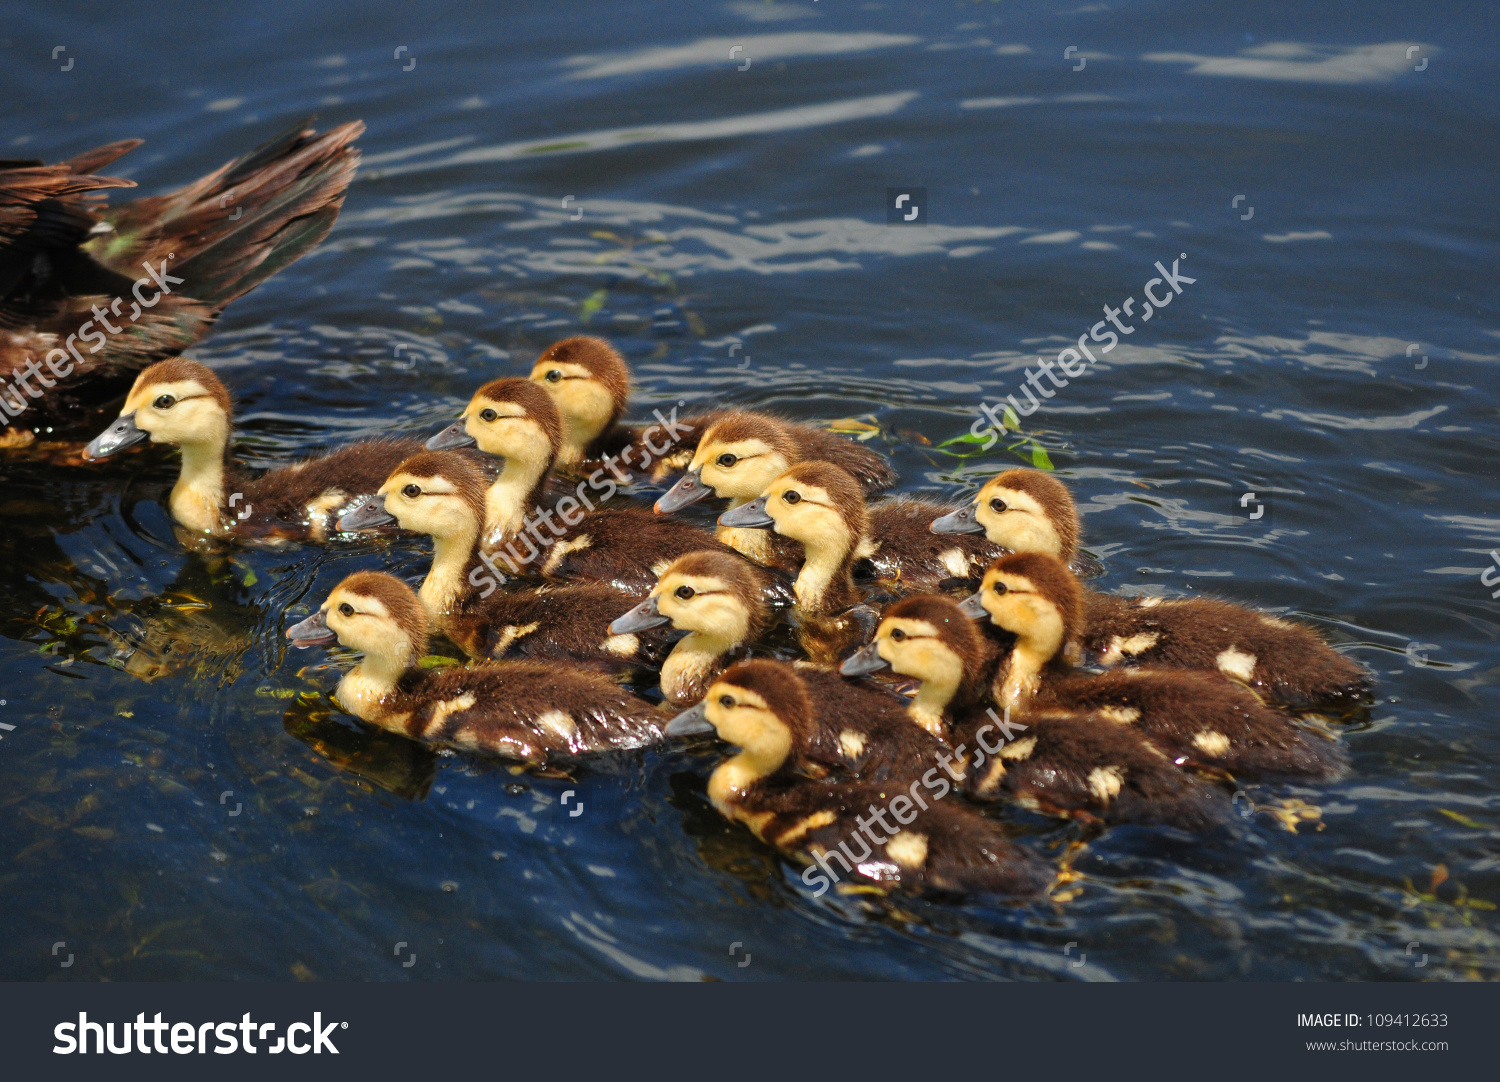 Mom And Cute Baby Scobie Ducks In Pond Stock Photo 109412633.